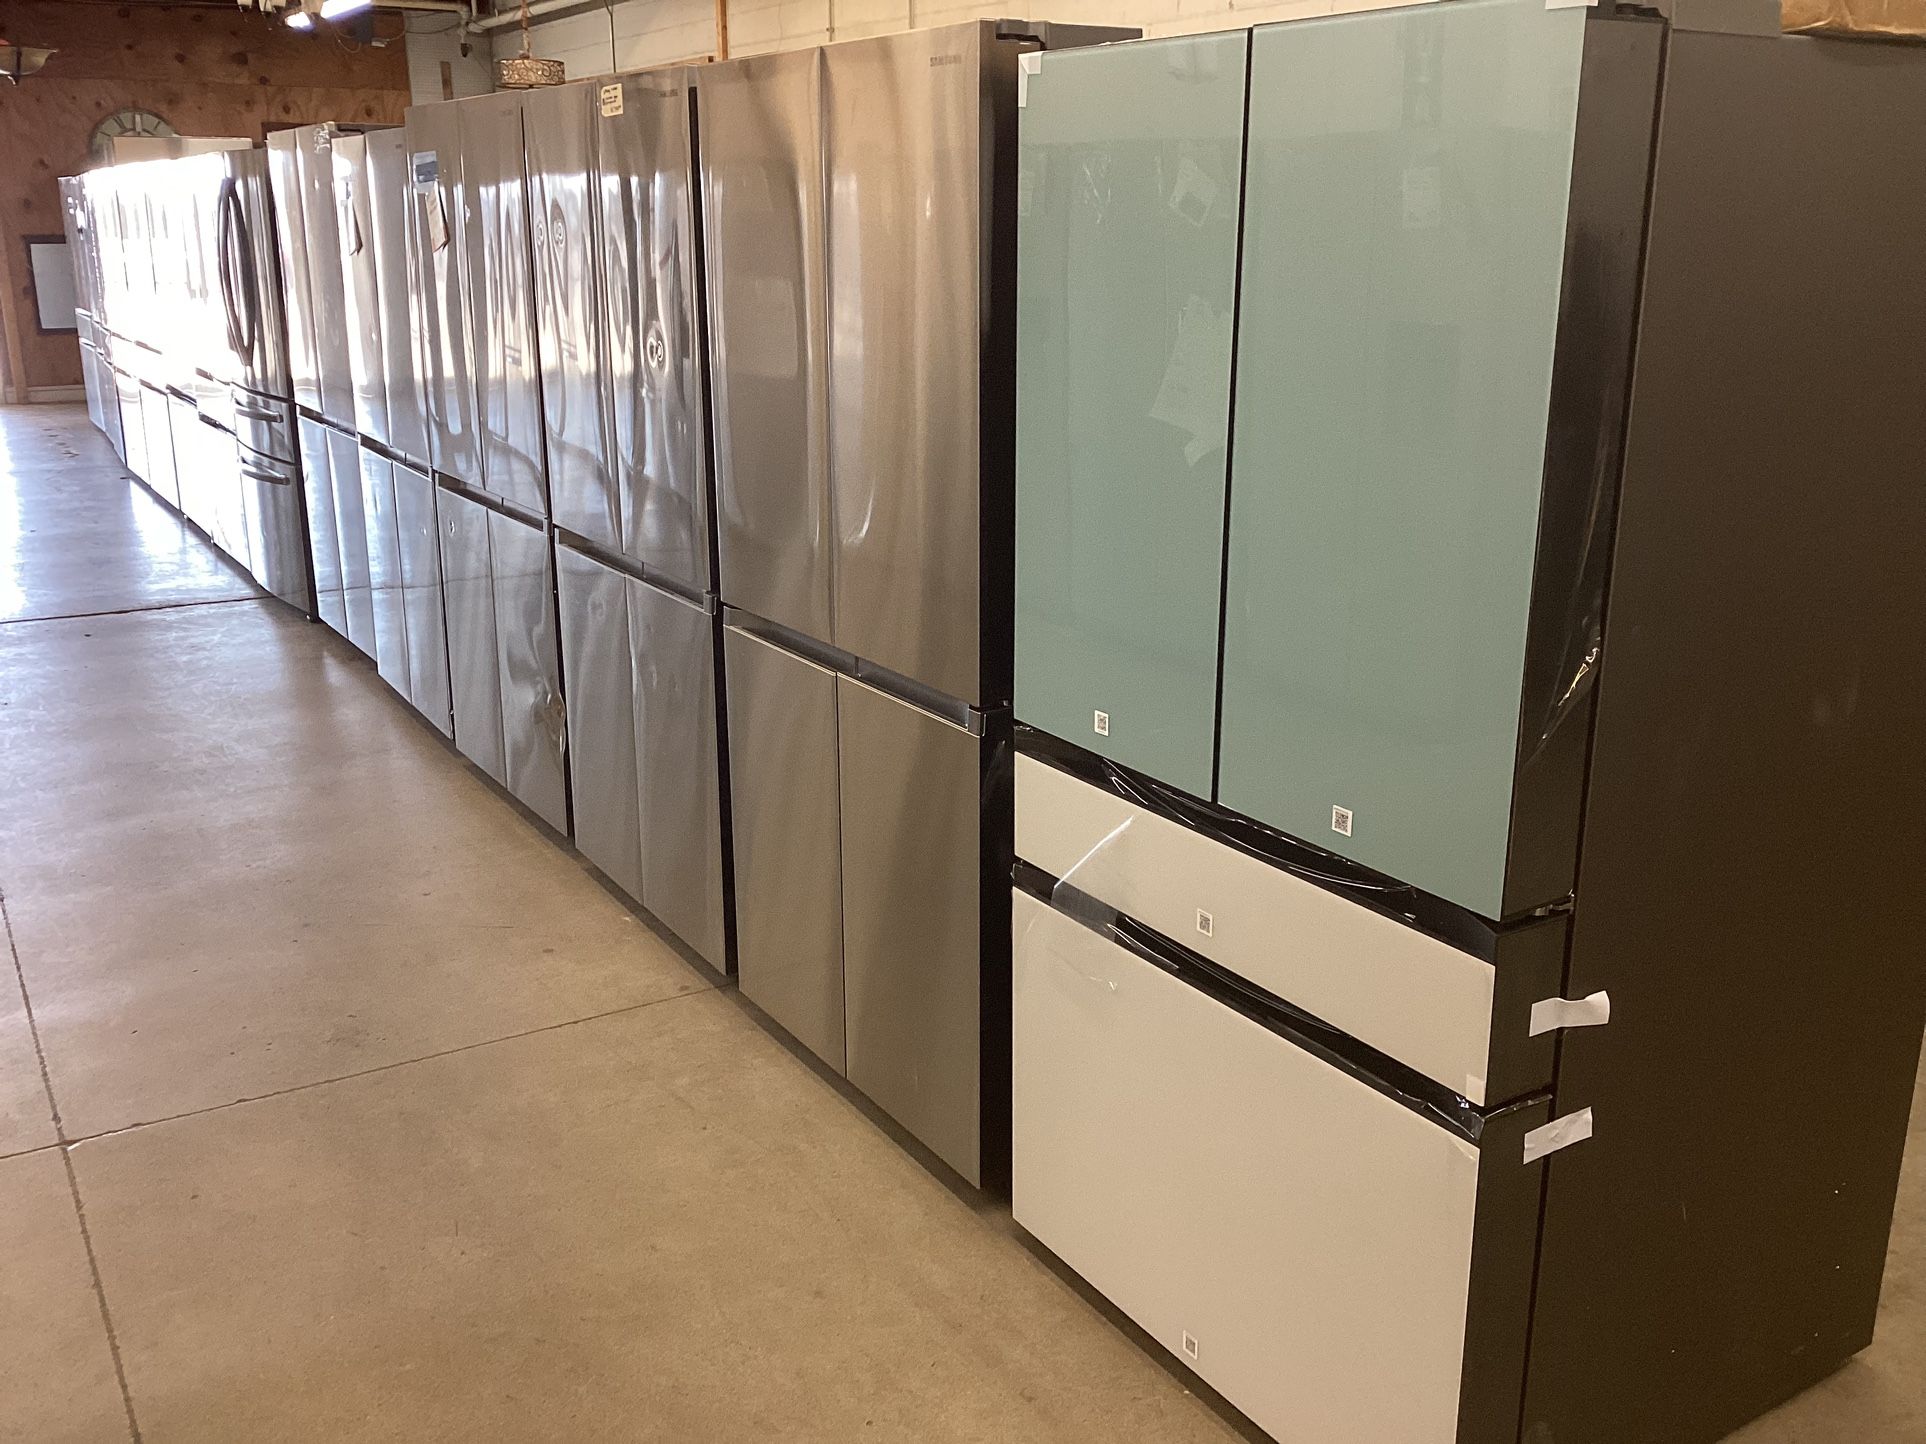 Samsung Bespoke French Door Refrigerators New Scratch And Dent Starting $1,200